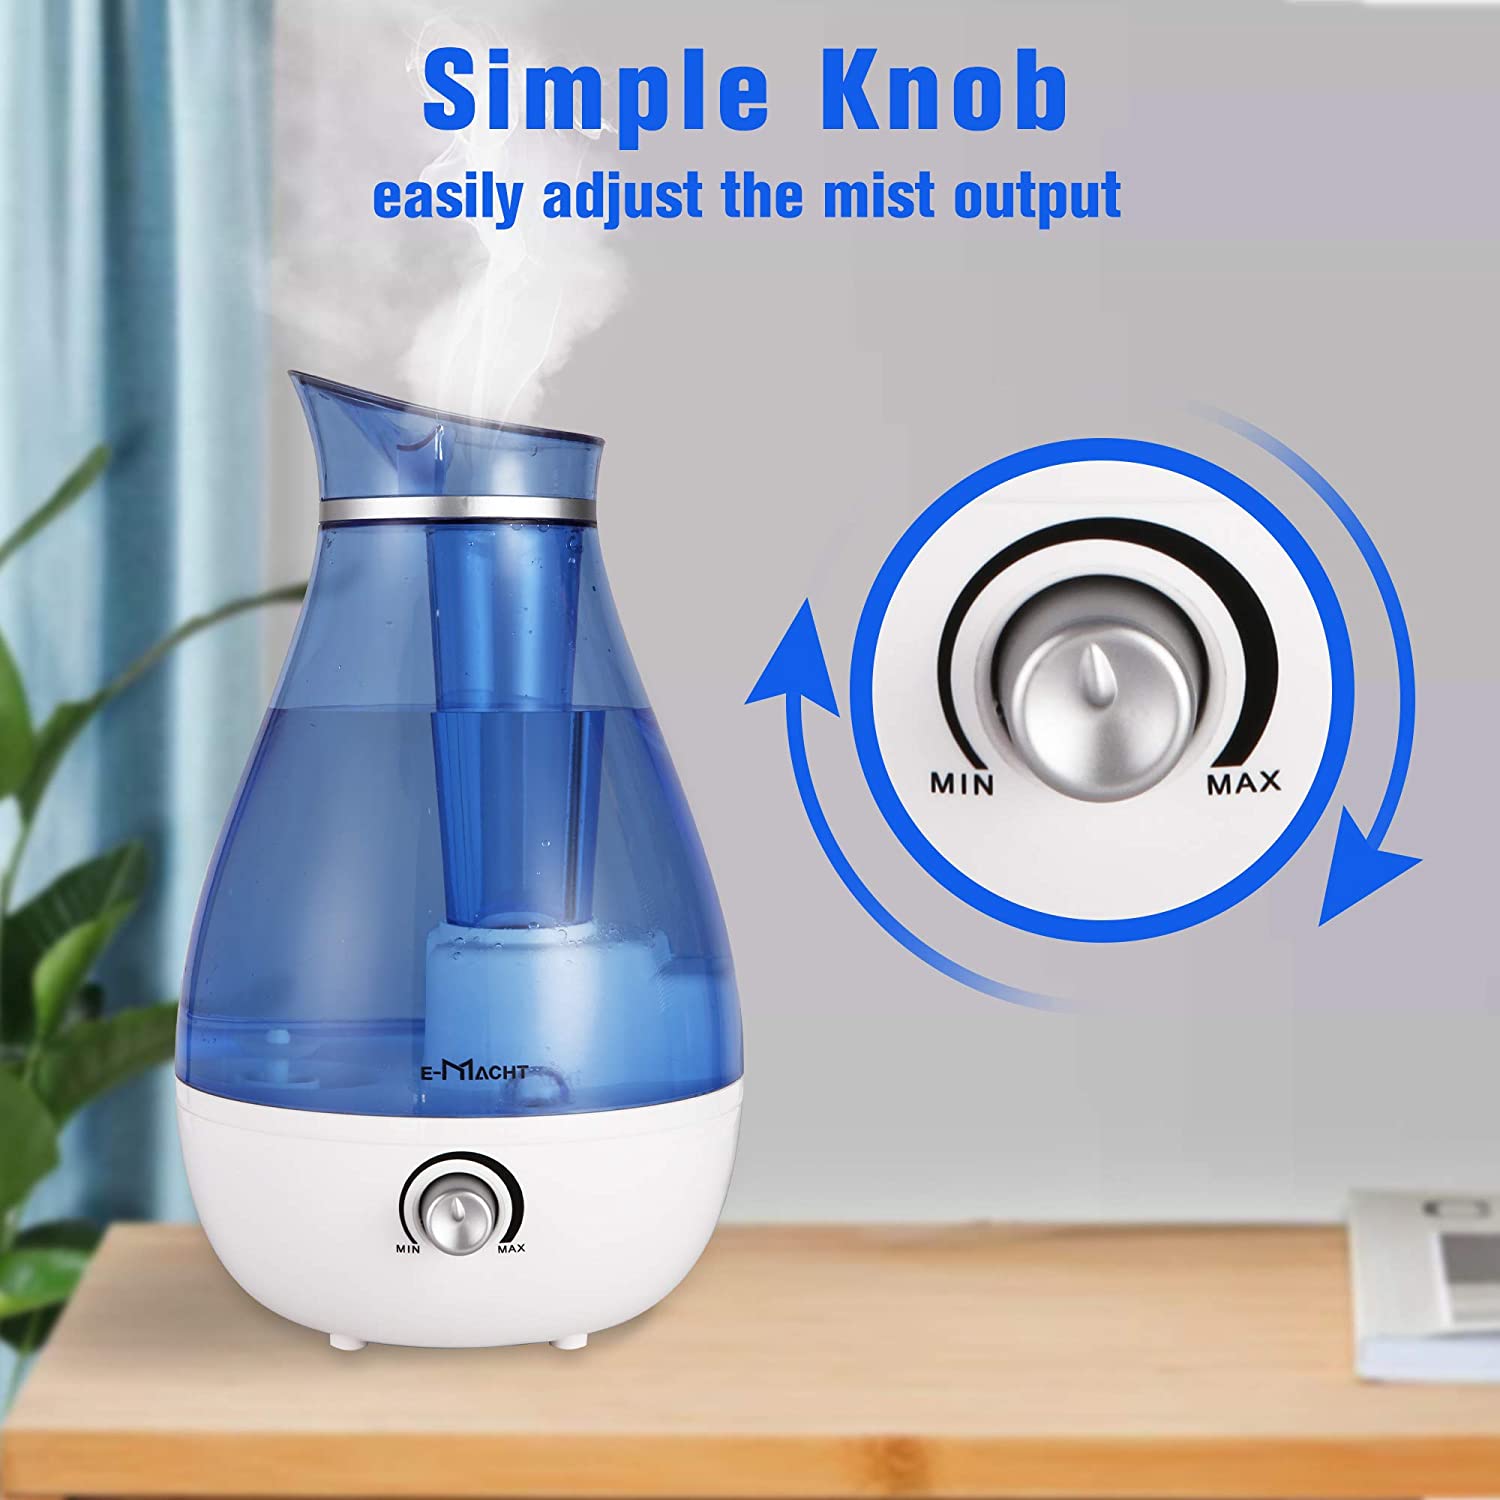 KARMAS PRODUCT Humidifiers for Bedroom Quiet Ultrasonic Cool Mist Humidifier 2.5L with Auto Shut-Off, Night Light and Adjustable Mist Output,Less Than 30dB,Blue - image 4 of 7